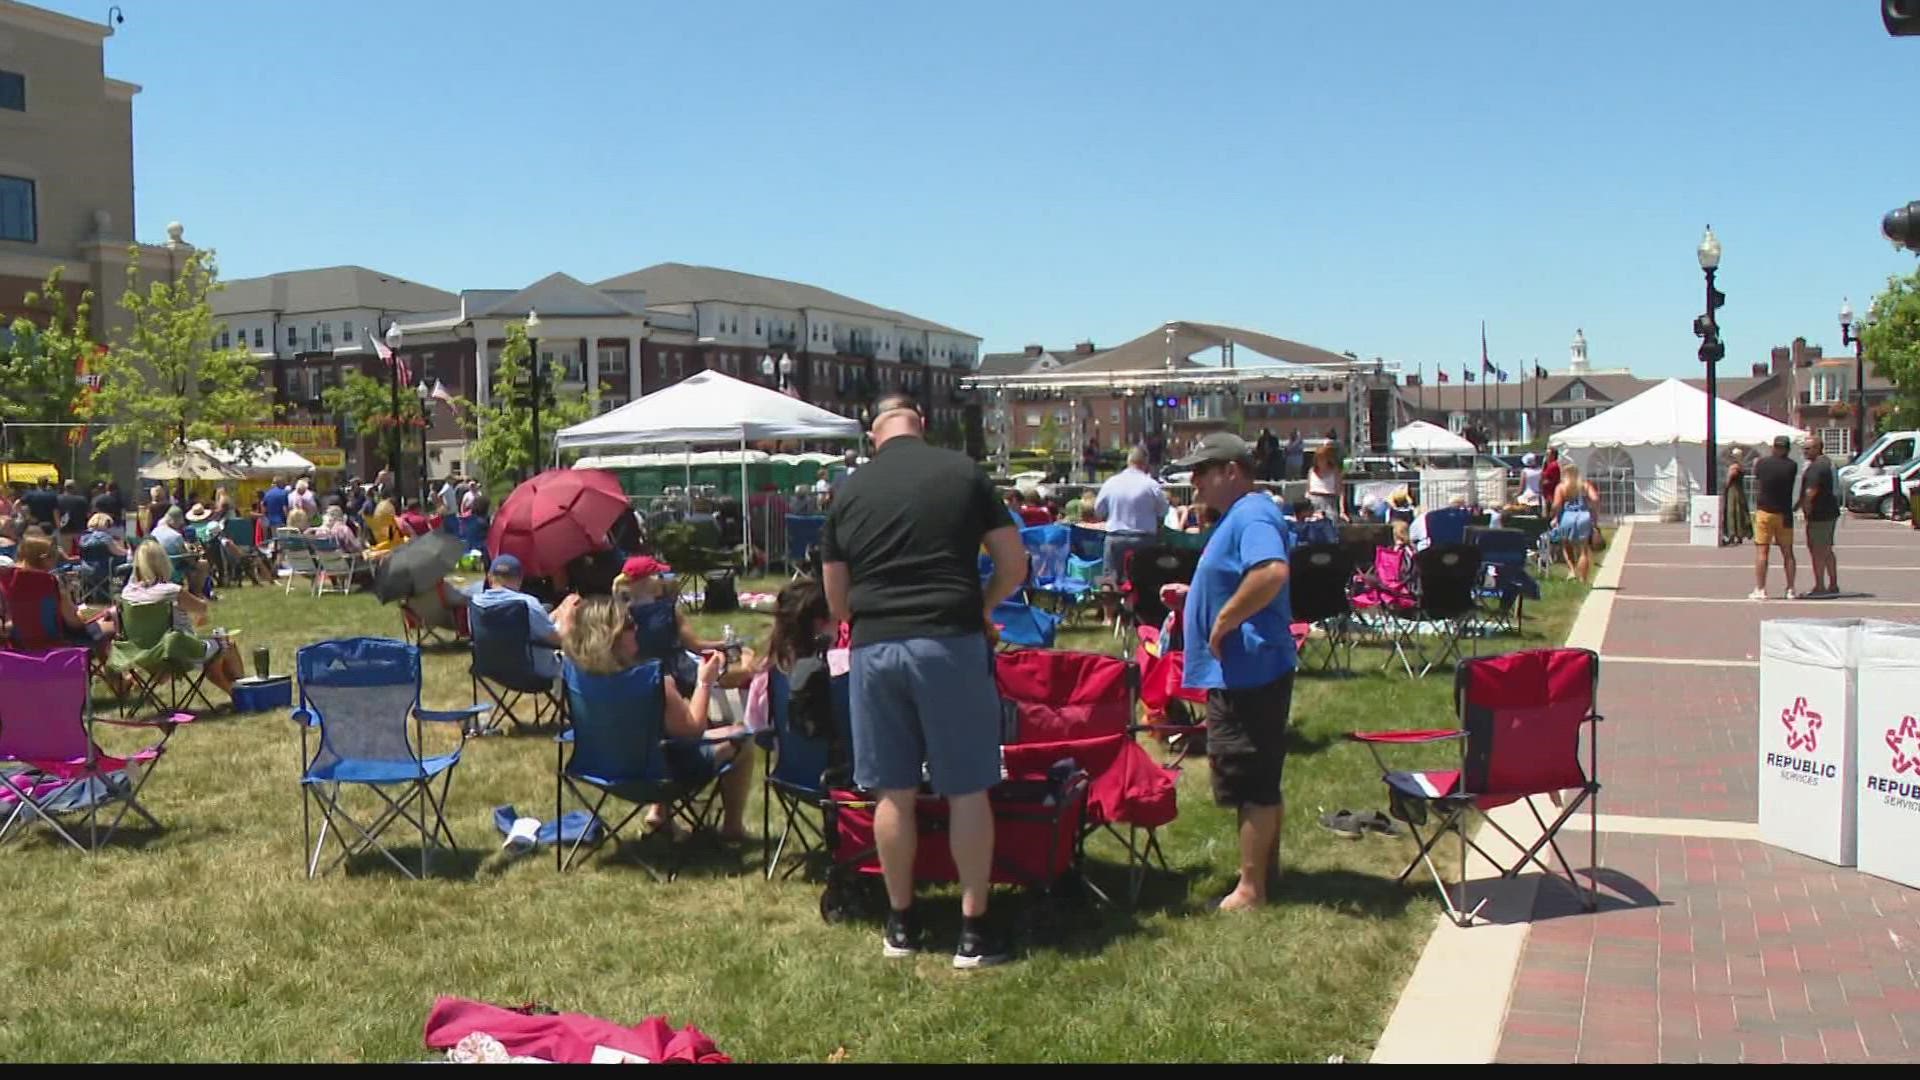 Carmel Fest kicked off Sunday. The huge summer event runs through Monday. There's food, entertainment, and vendors and there will be fireworks both tonight and tomor